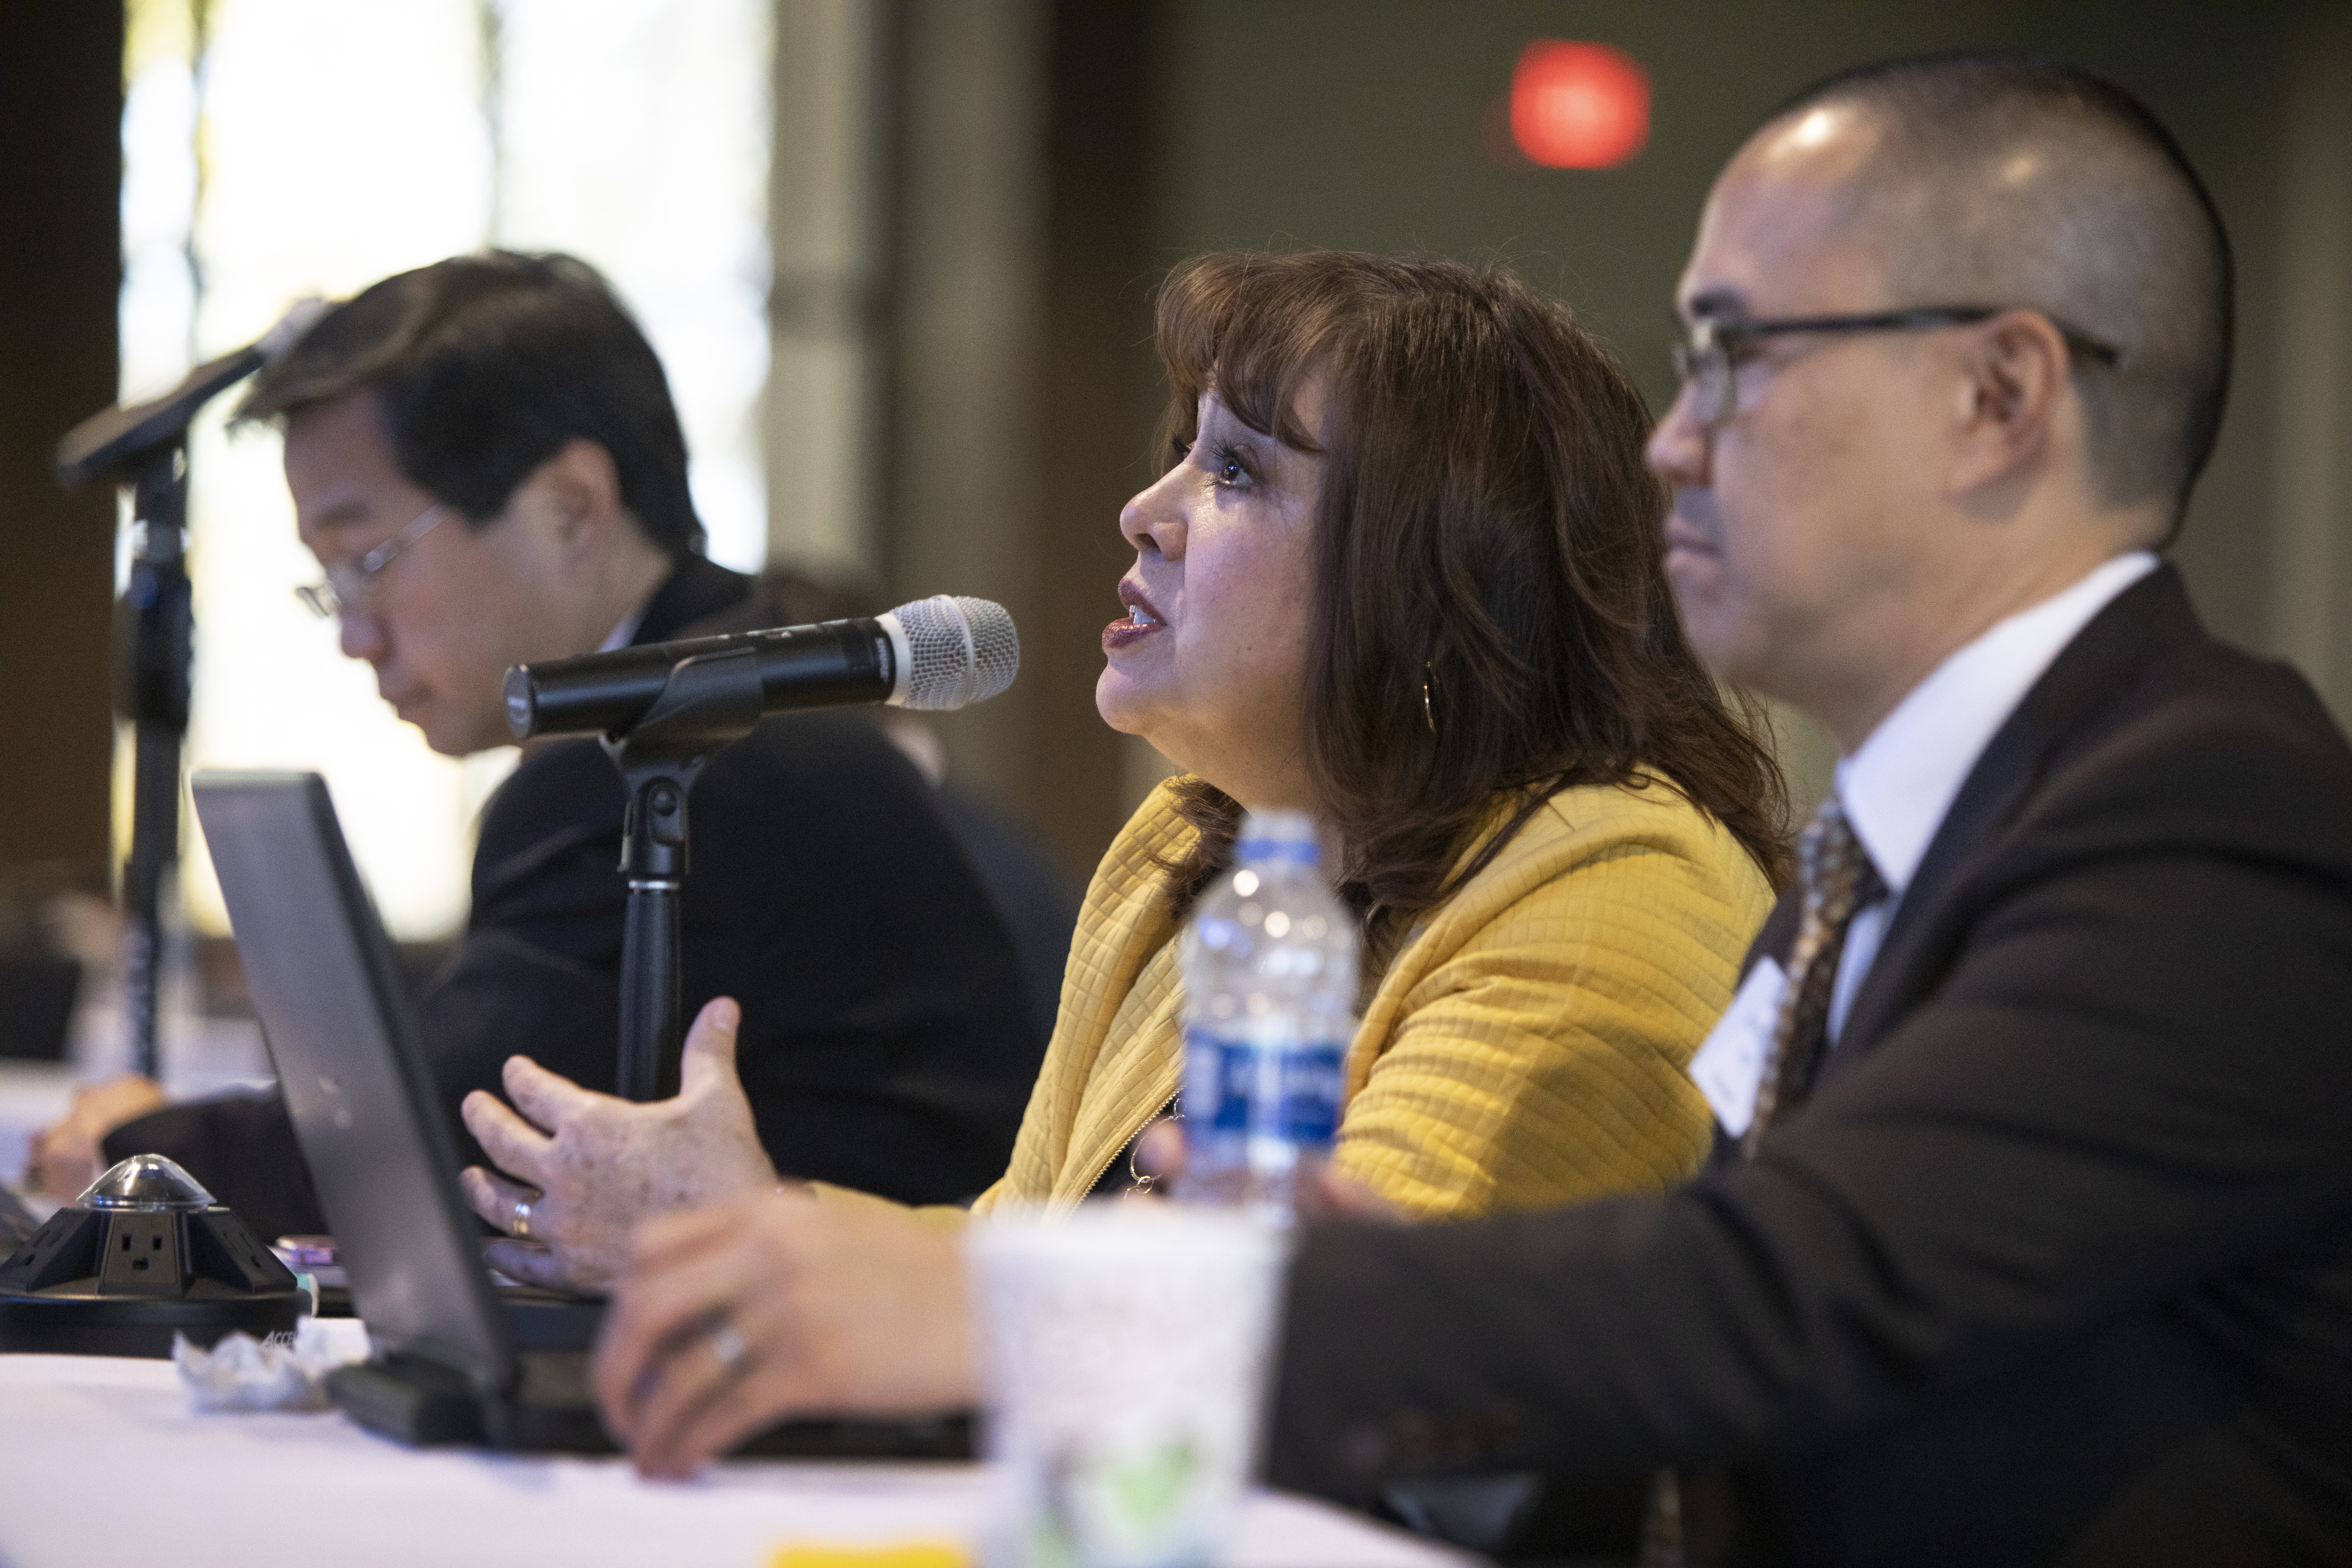 Bishop Minerva Carcaño asks a question during the board meeting of the General Council on Finance and Administration held at Providence United Methodist Church in Mount Juliet, Tenn. on Nov. 16, 2018. Pictured (from left) are Kenneth Ow, Carcaño, and the Rev. Anthony Tang. Photo by Kathleen Barry, UMNS.